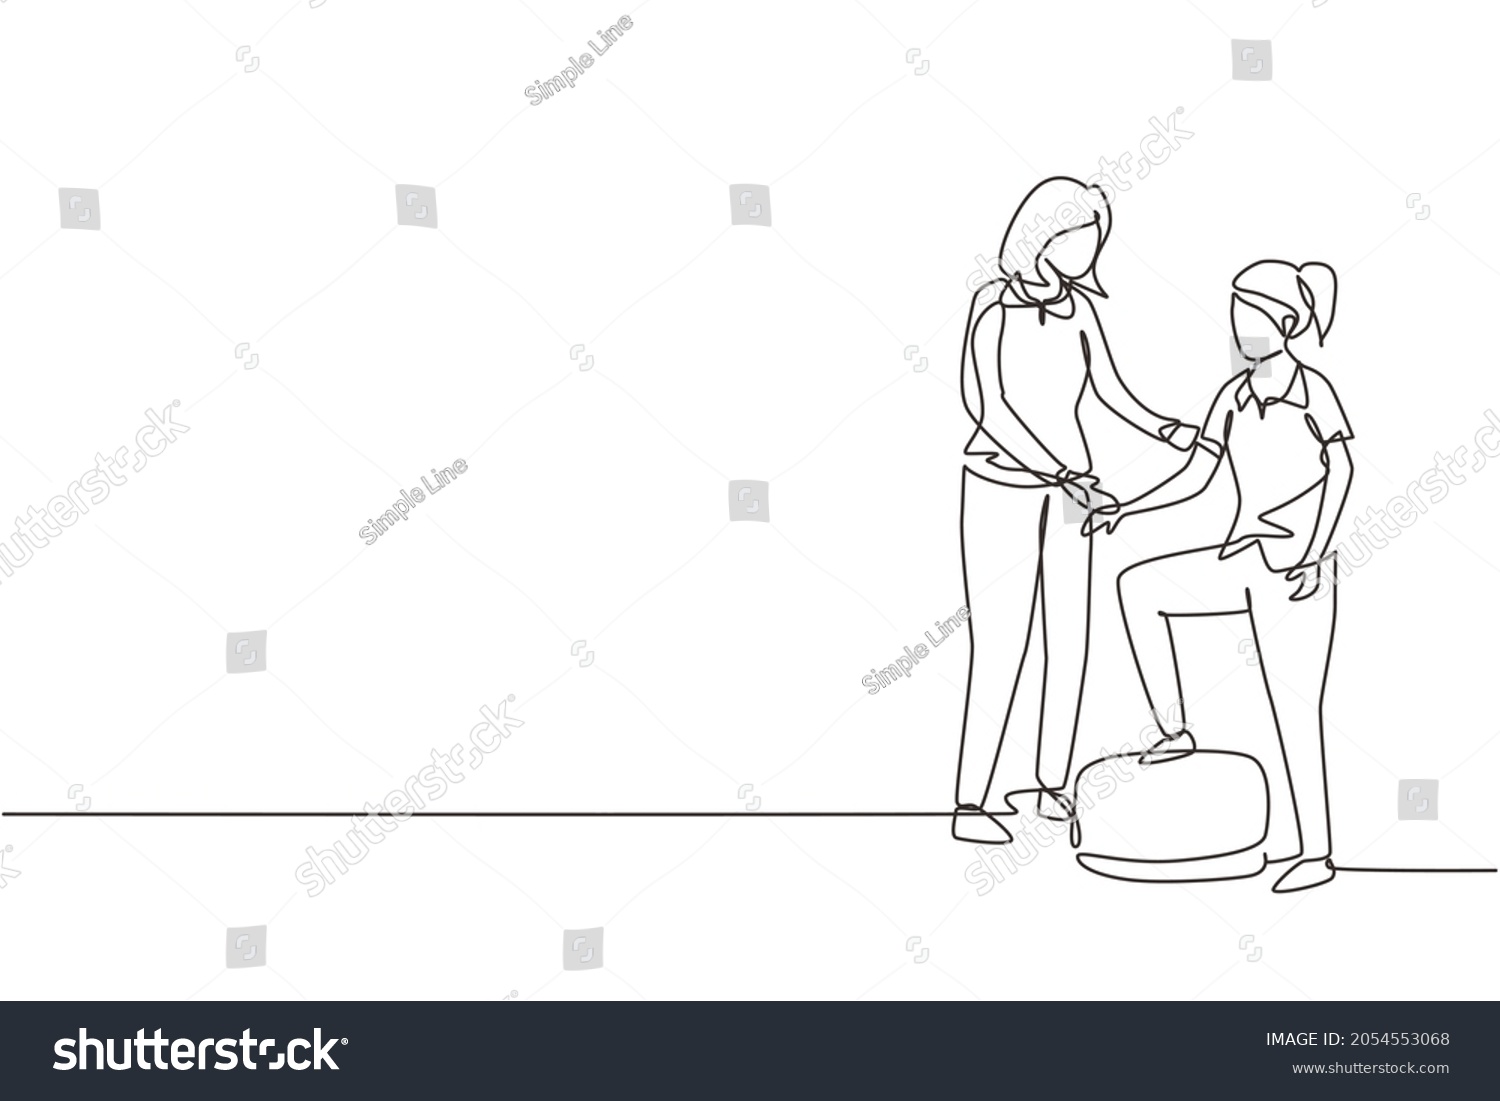 SVG of Single one line drawing woman therapist helping young female patient stepping up the stairs, medical rehabilitation, physical therapy activity. Continuous line draw design graphic vector illustration svg